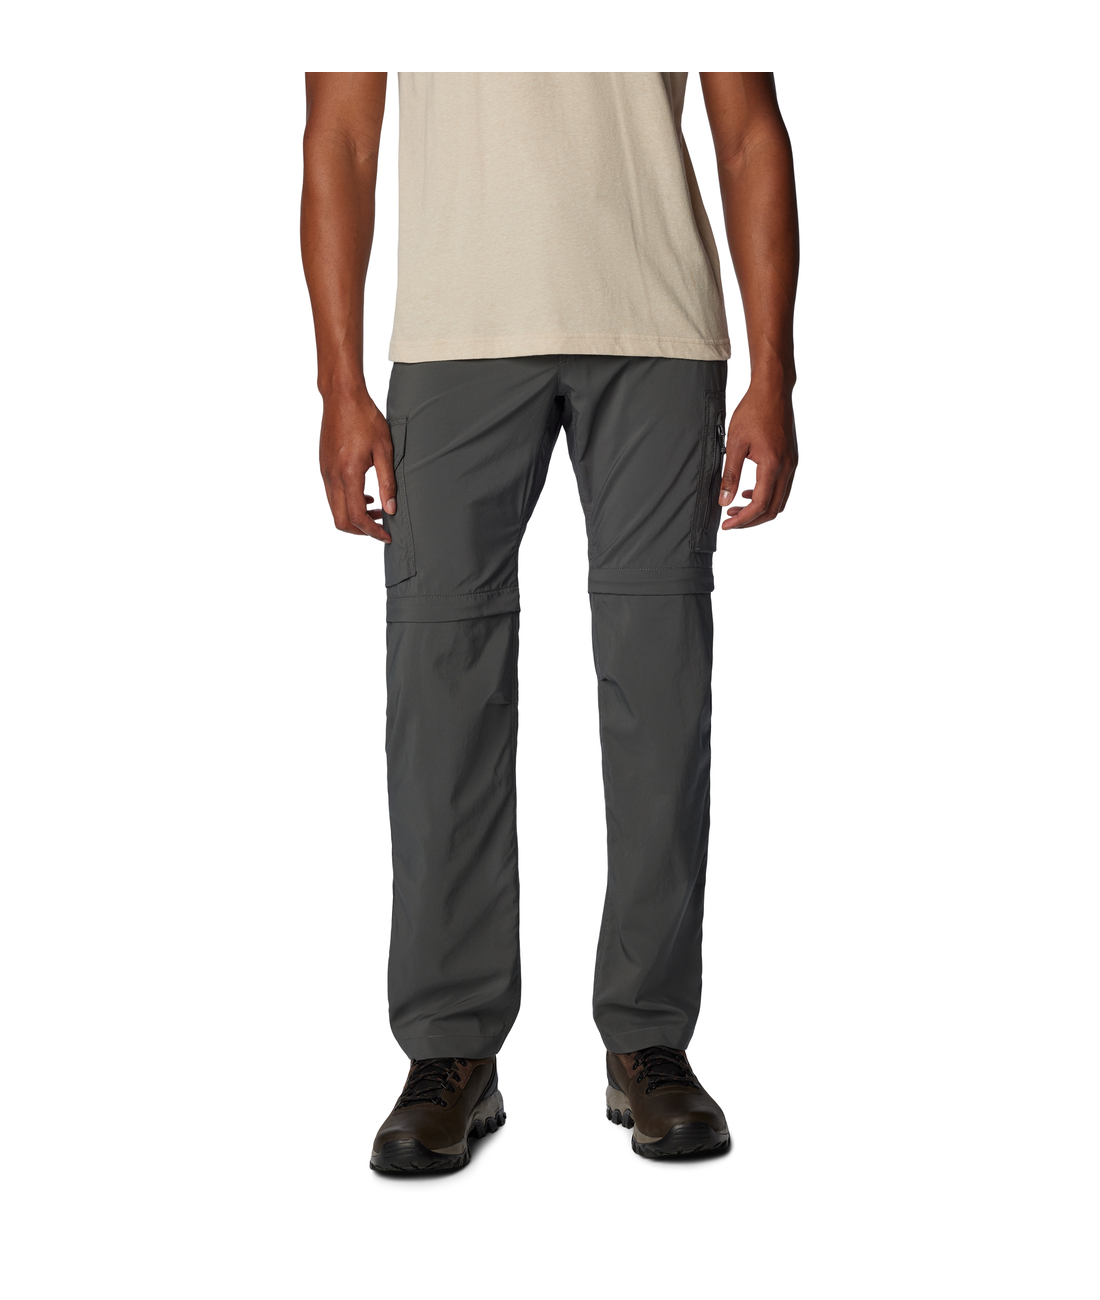 Silver Ridge Utility Convertible Pant - 30 Schrittlnge